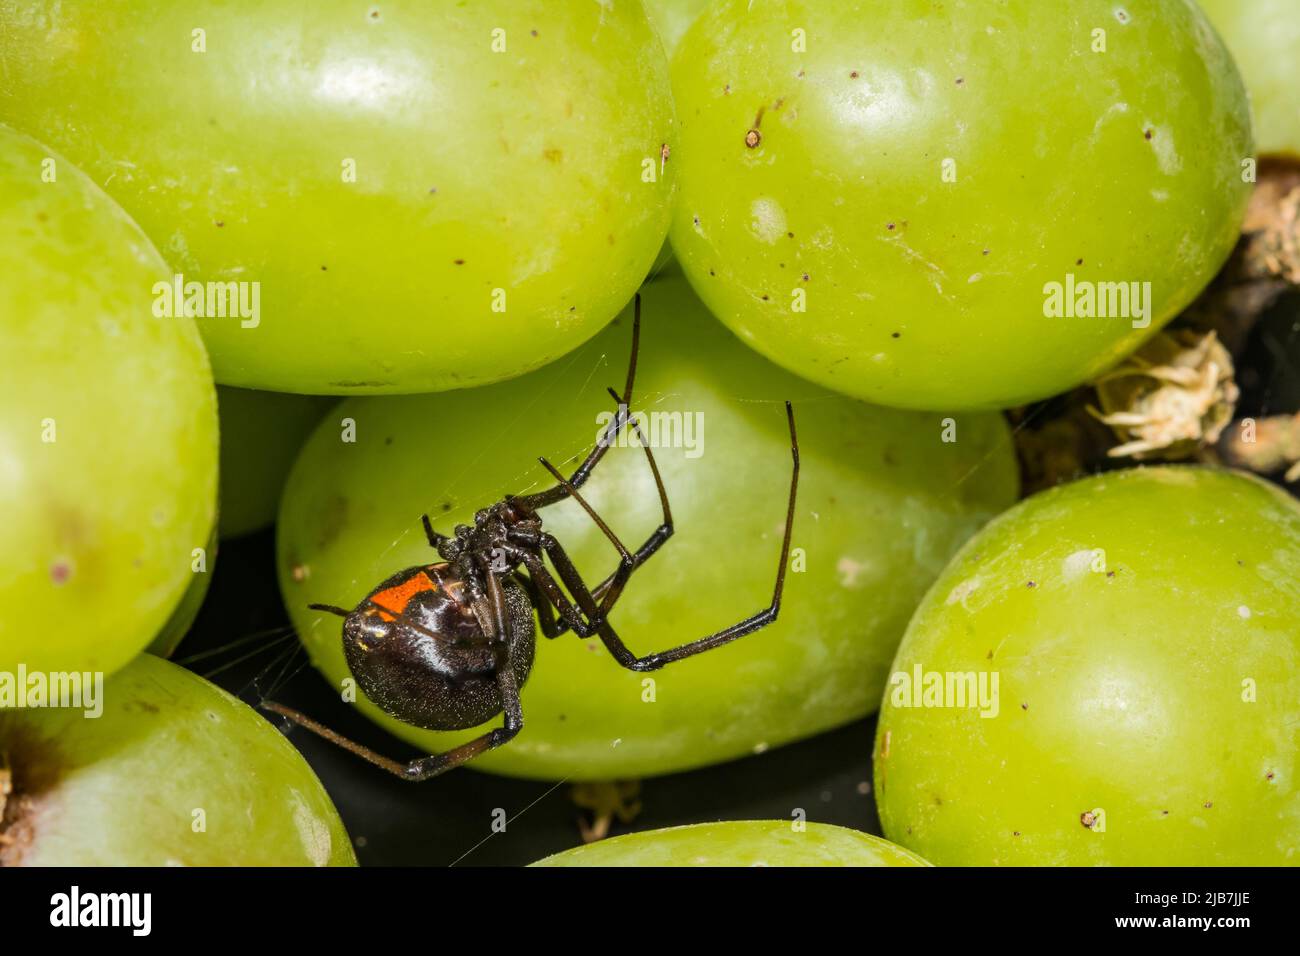 Black Widow Spider hiding in grapes from the supermarket Stock Photo